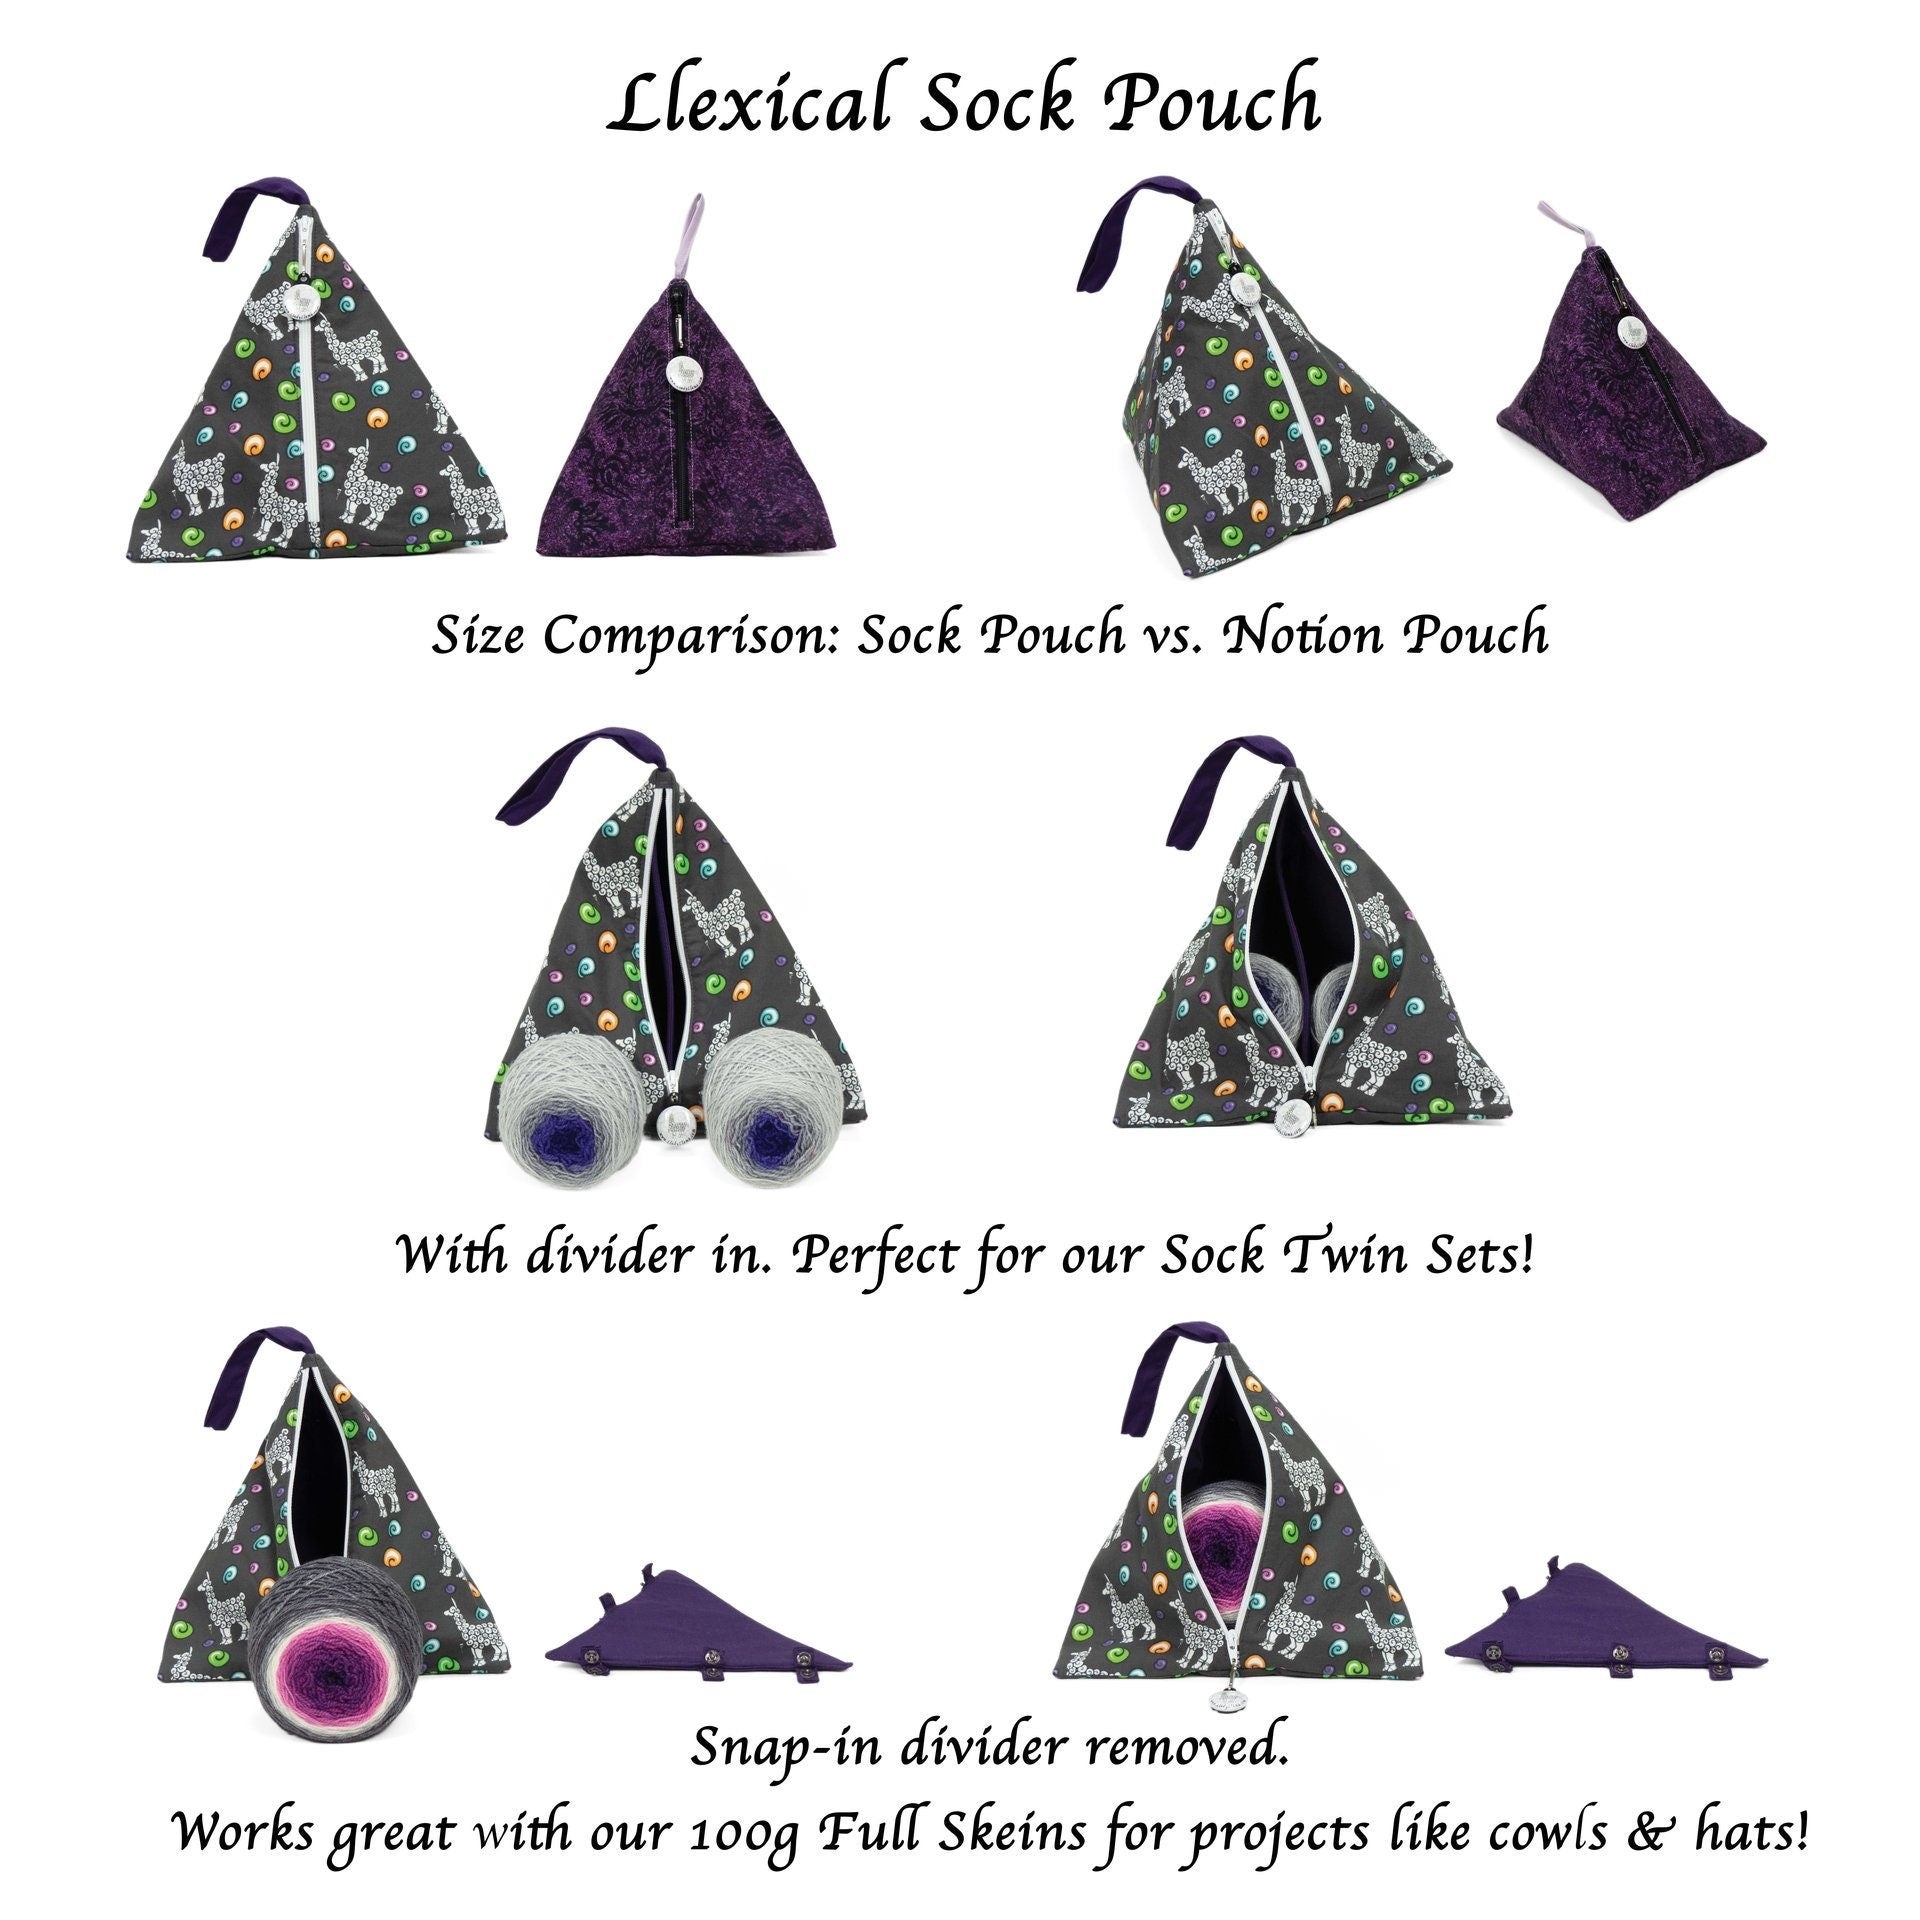 Crystal Visions Grey - Llexical Divided Sock Pouch - Knitting, Crochet, Spinning Project Bag